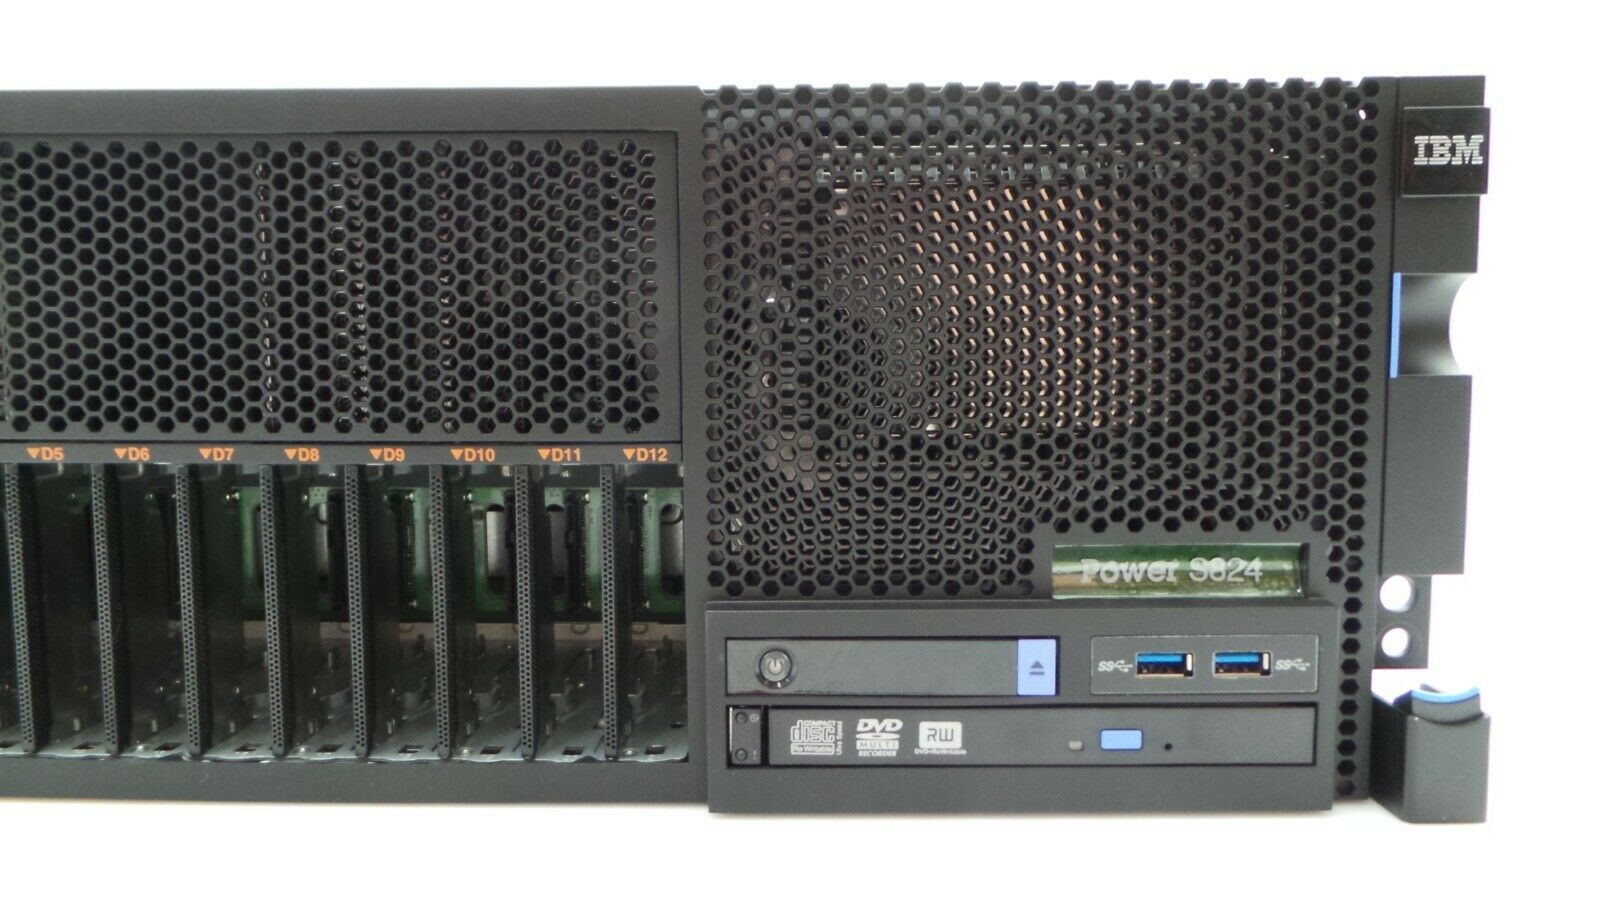 IBM 8286-42A_16Core Power8 S824 Server Configuration, Used